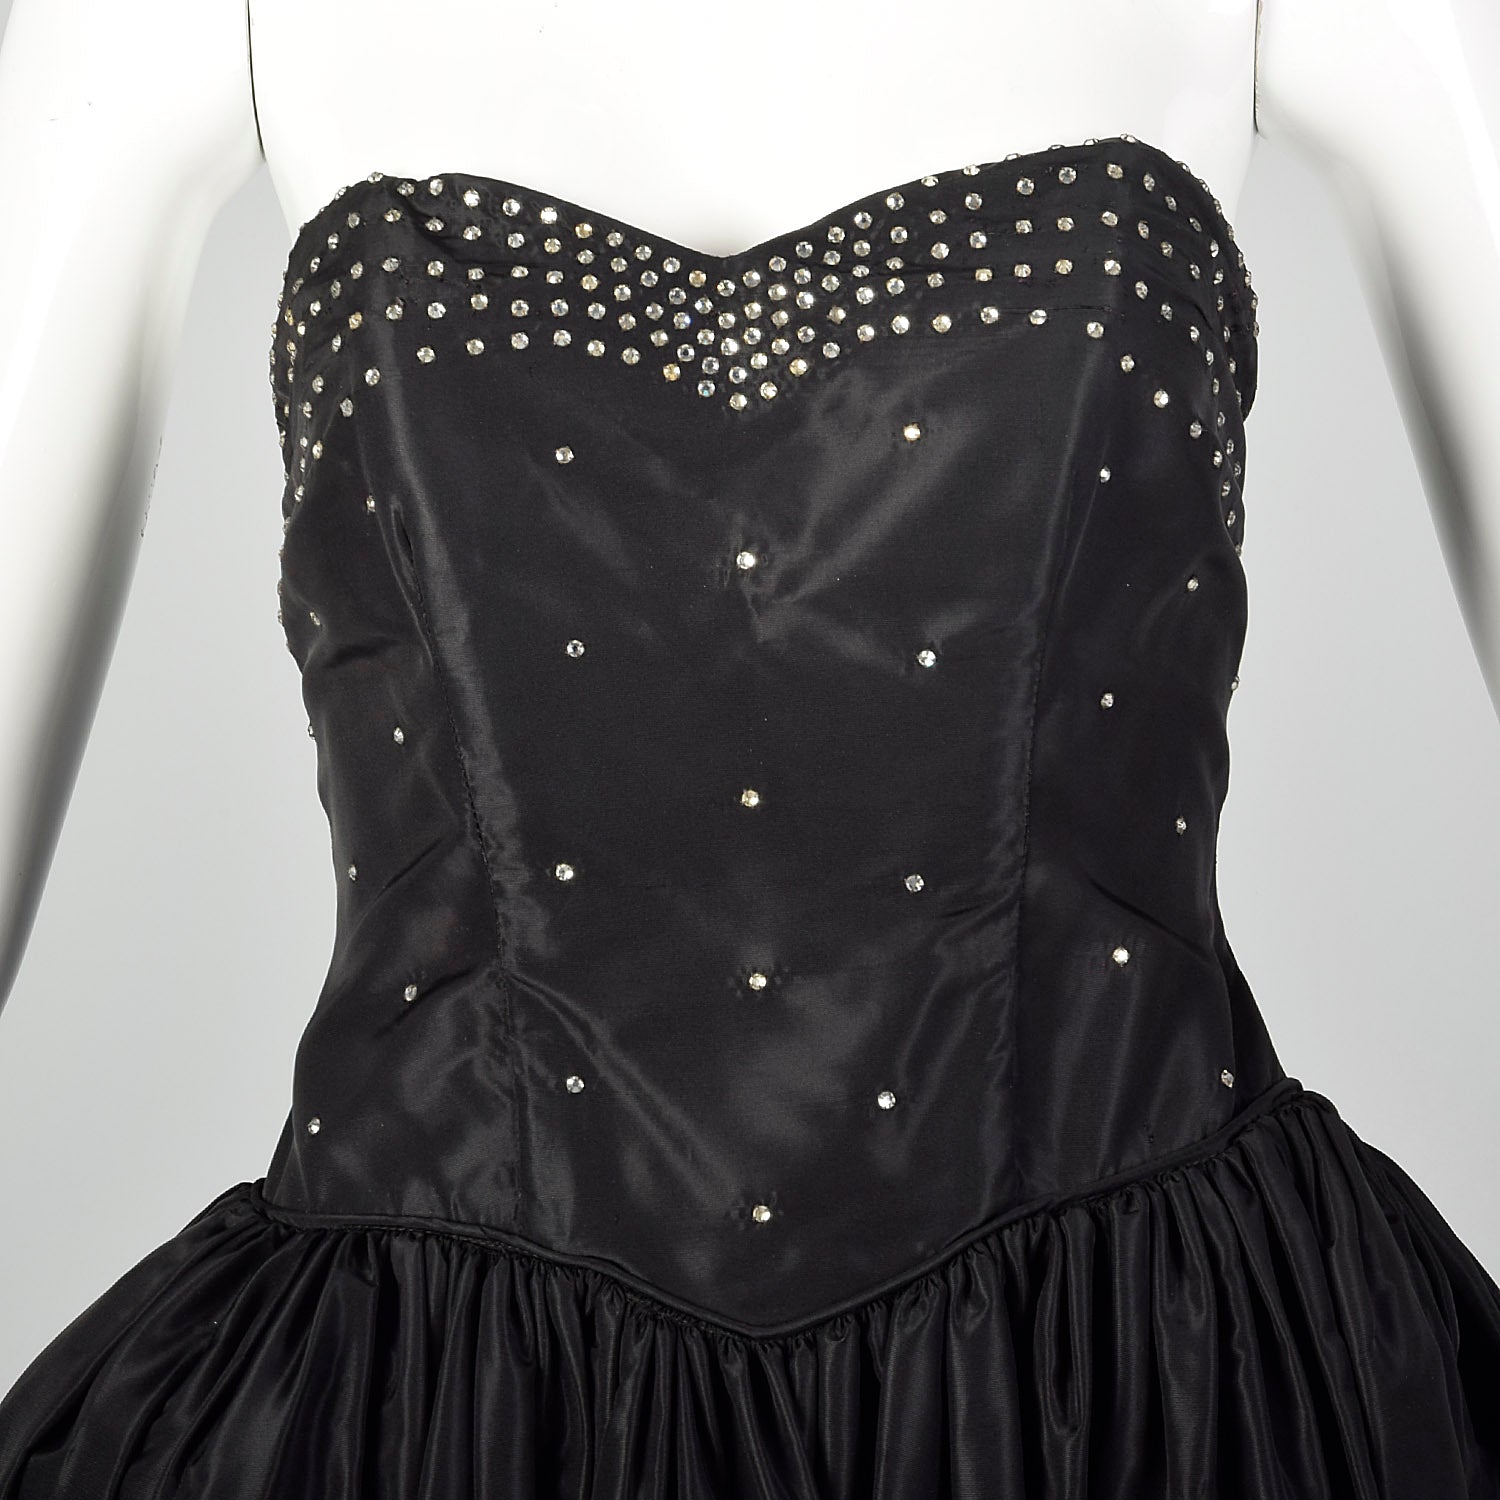 XXS 1940s Black Taffeta Evening Gown Formal Party Dress with Panniers and Rhinestone Studded Bodice